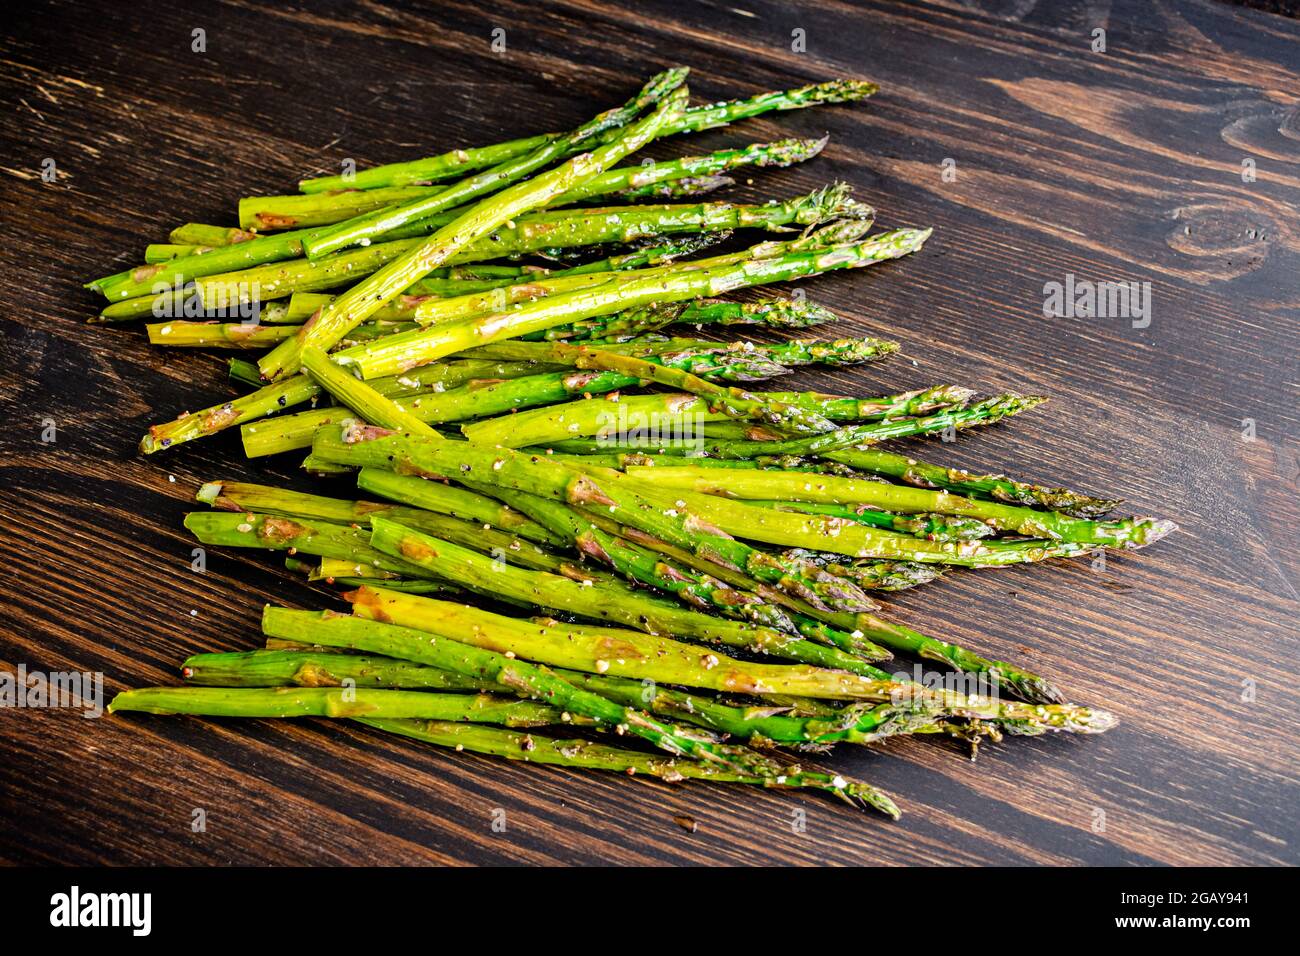 Roasted Asparagus on a Dark Wooden Background: Roasted asparagus seasoned with extra virgin olive oil, kosher salt, and black pepper Stock Photo